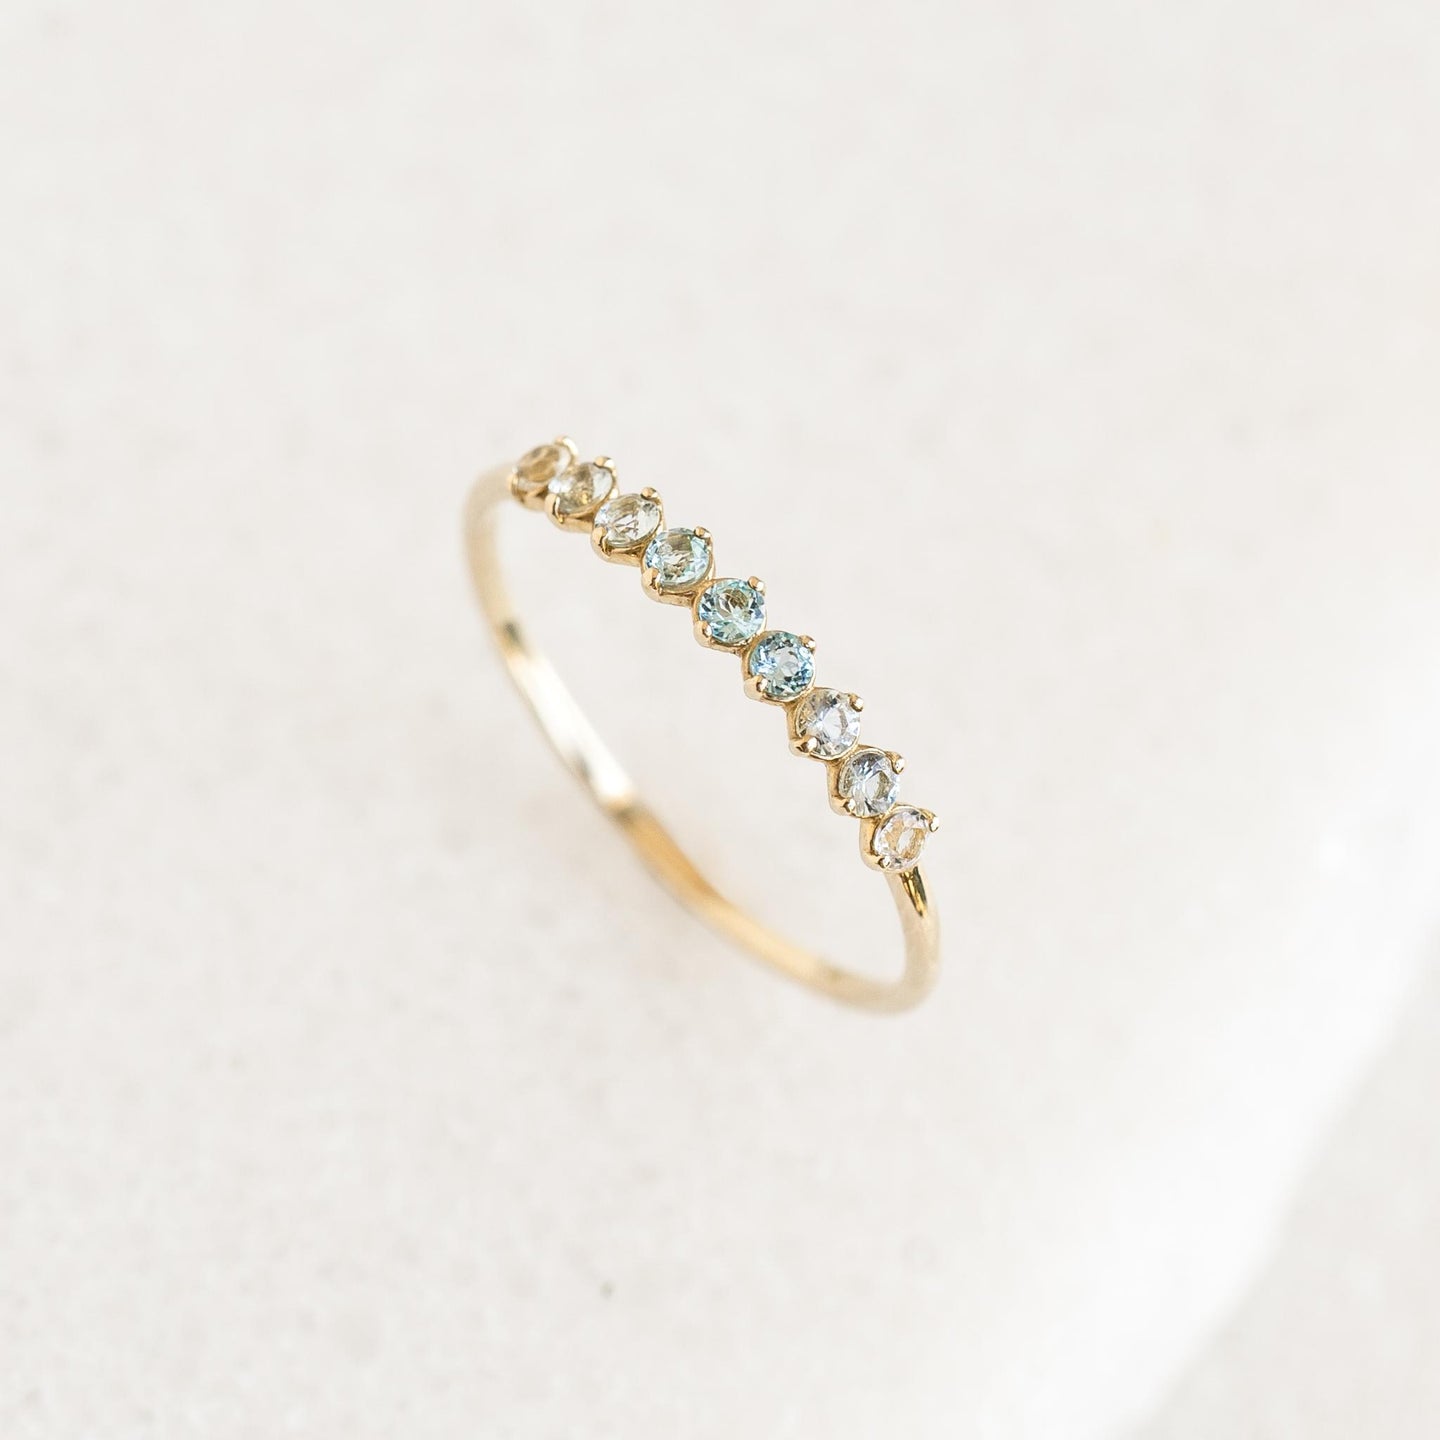 March Birthstone Ring 14k Gold - Ombre Blue Topaz